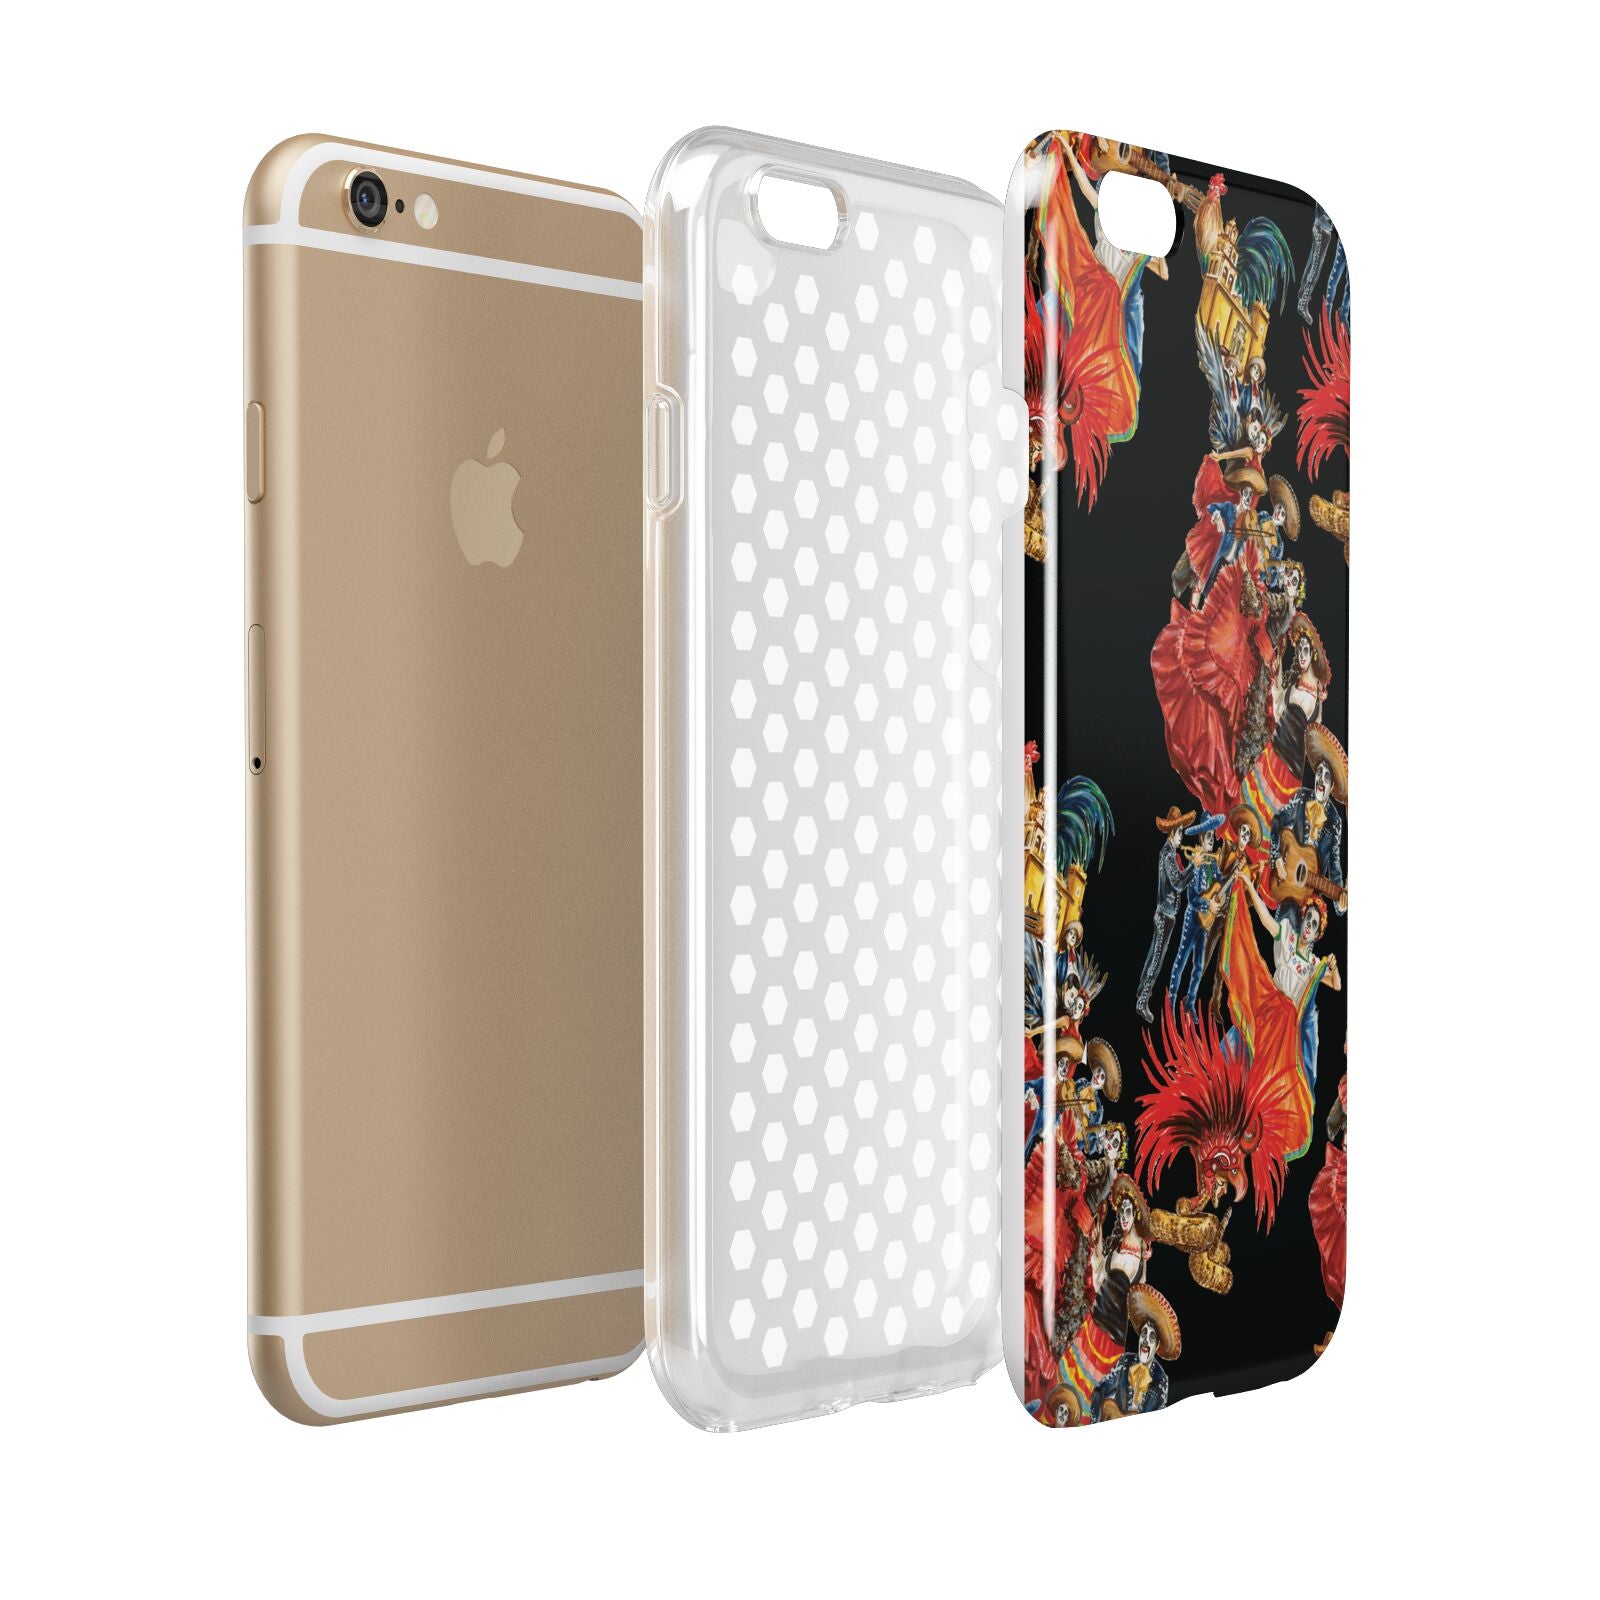 Day of the Dead Festival Apple iPhone 6 3D Tough Case Expanded view